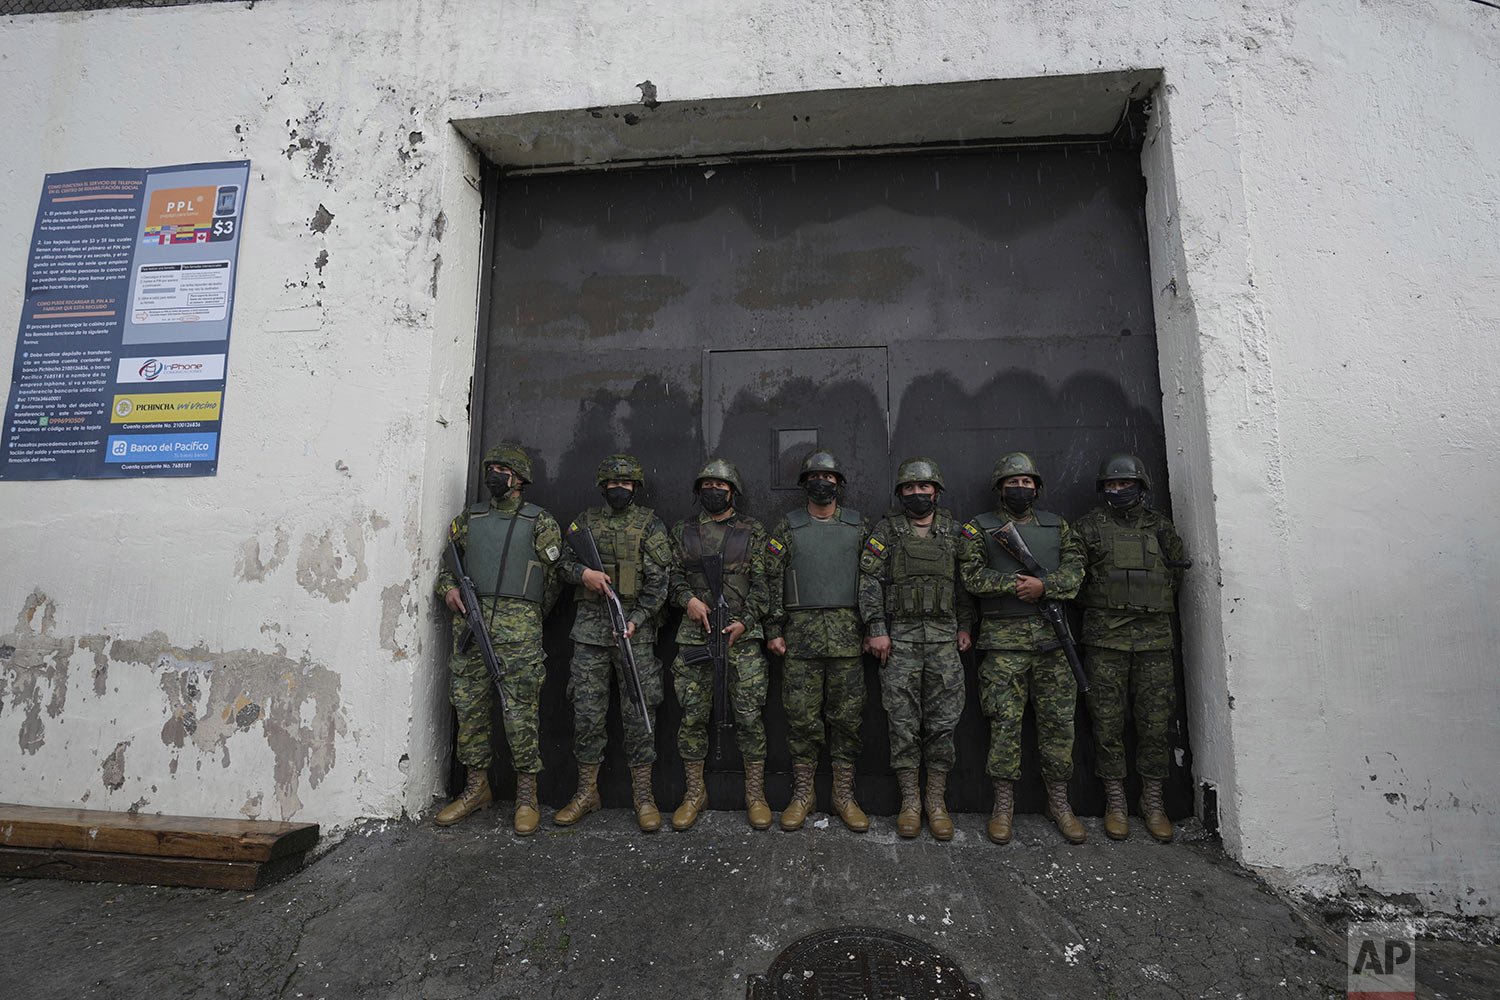  Soldiers guard an entrance to the Inca jail where 10 inmates were killed during a prison riot, according to Police Commander Victor Herrera, in Quito, Ecuador, Friday, Nov. 18, 2022.  (AP Photo/Dolores Ochoa) 